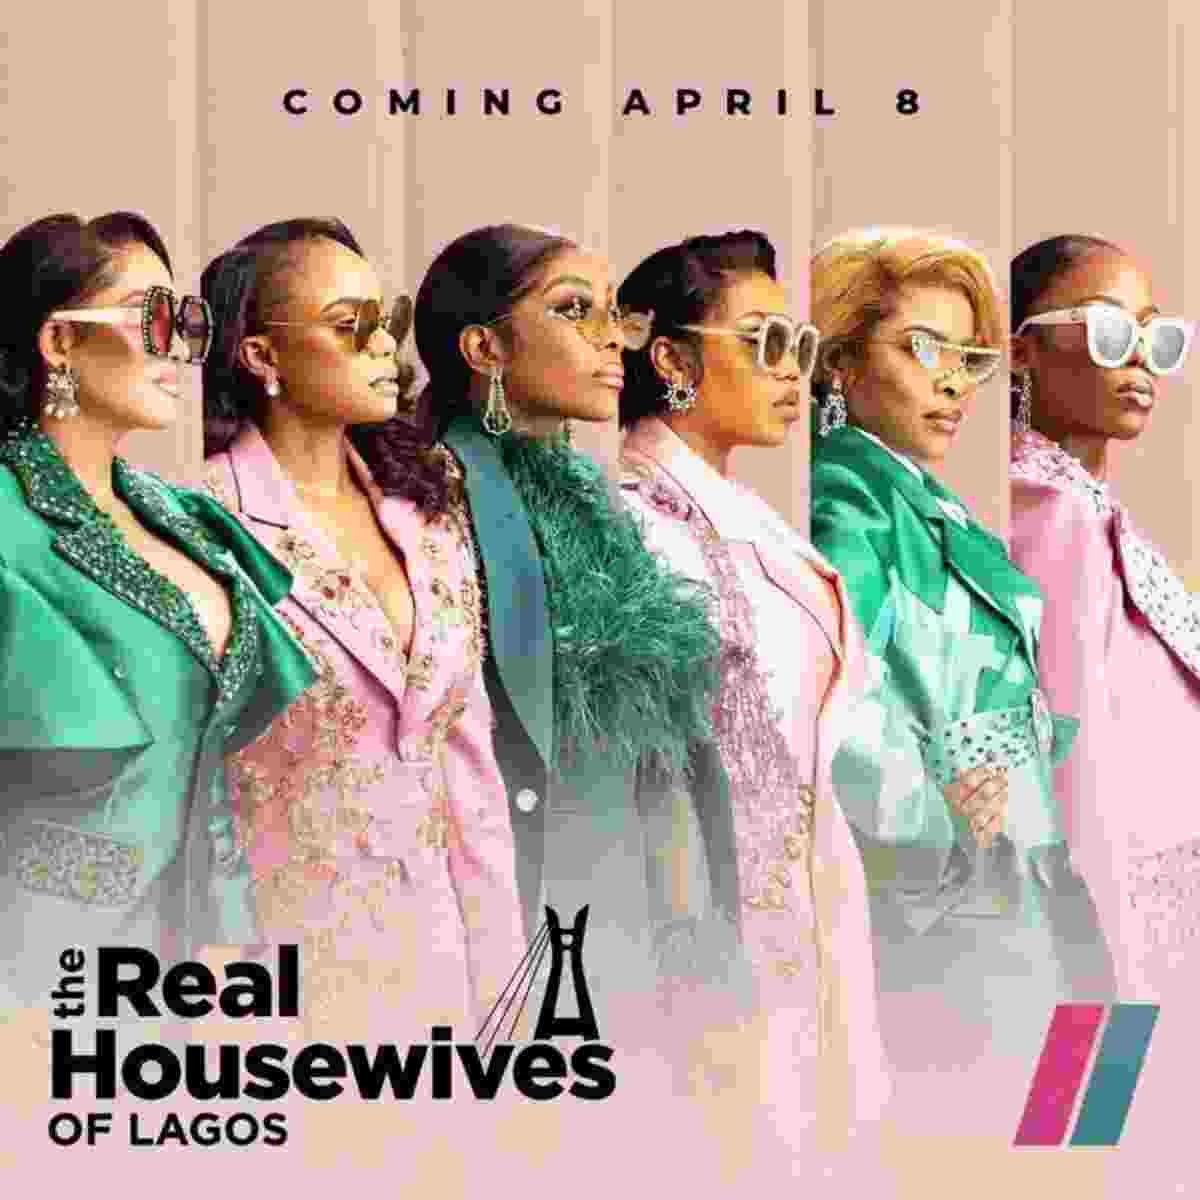 Checkout The Full Profile Cast Of Real Housewives Of Lagos